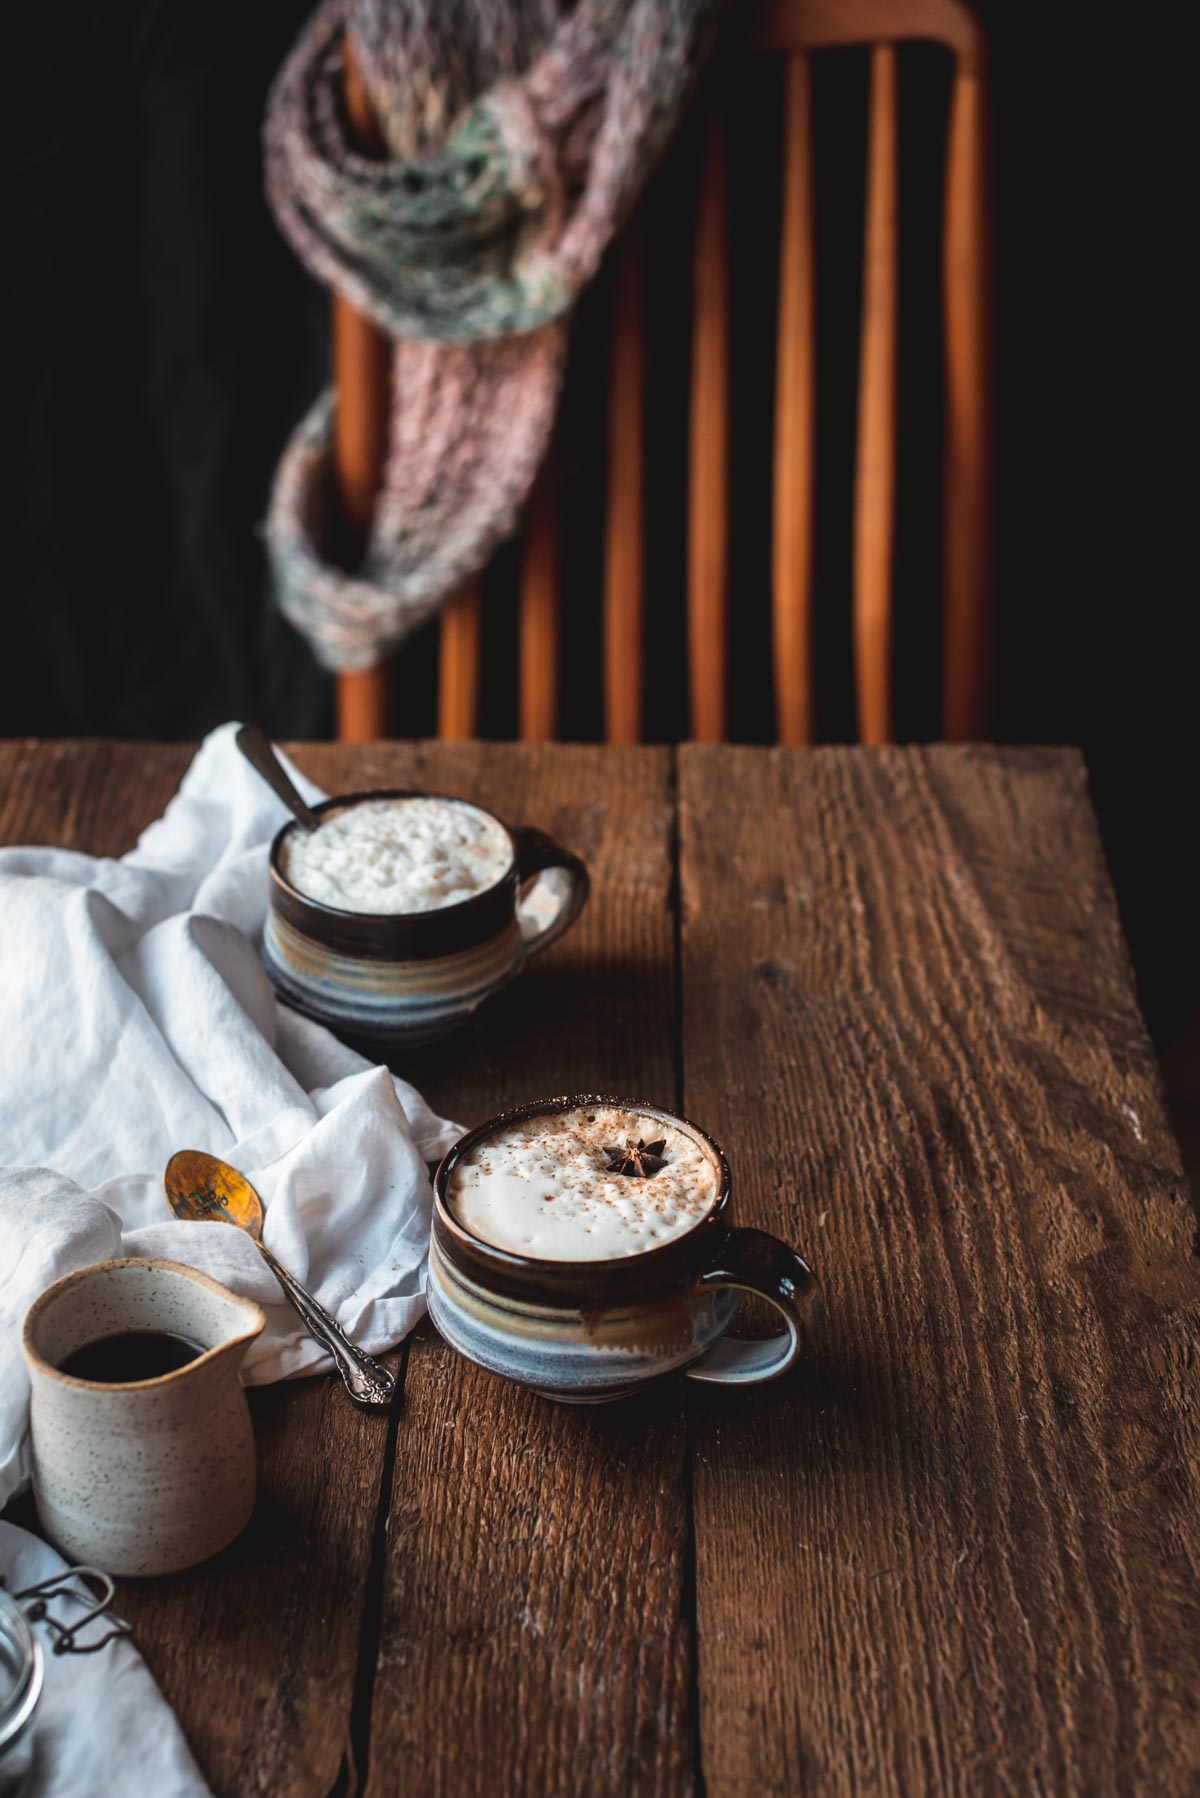 Two coffee mugs filled with foamy milk and sprinkled with cinnamon on top of a rustic wood surface.  A ceramic carafe and antique spoon are next to the mugs on a white linen napkin.  A wooden chair draped with a scarf is in the background.